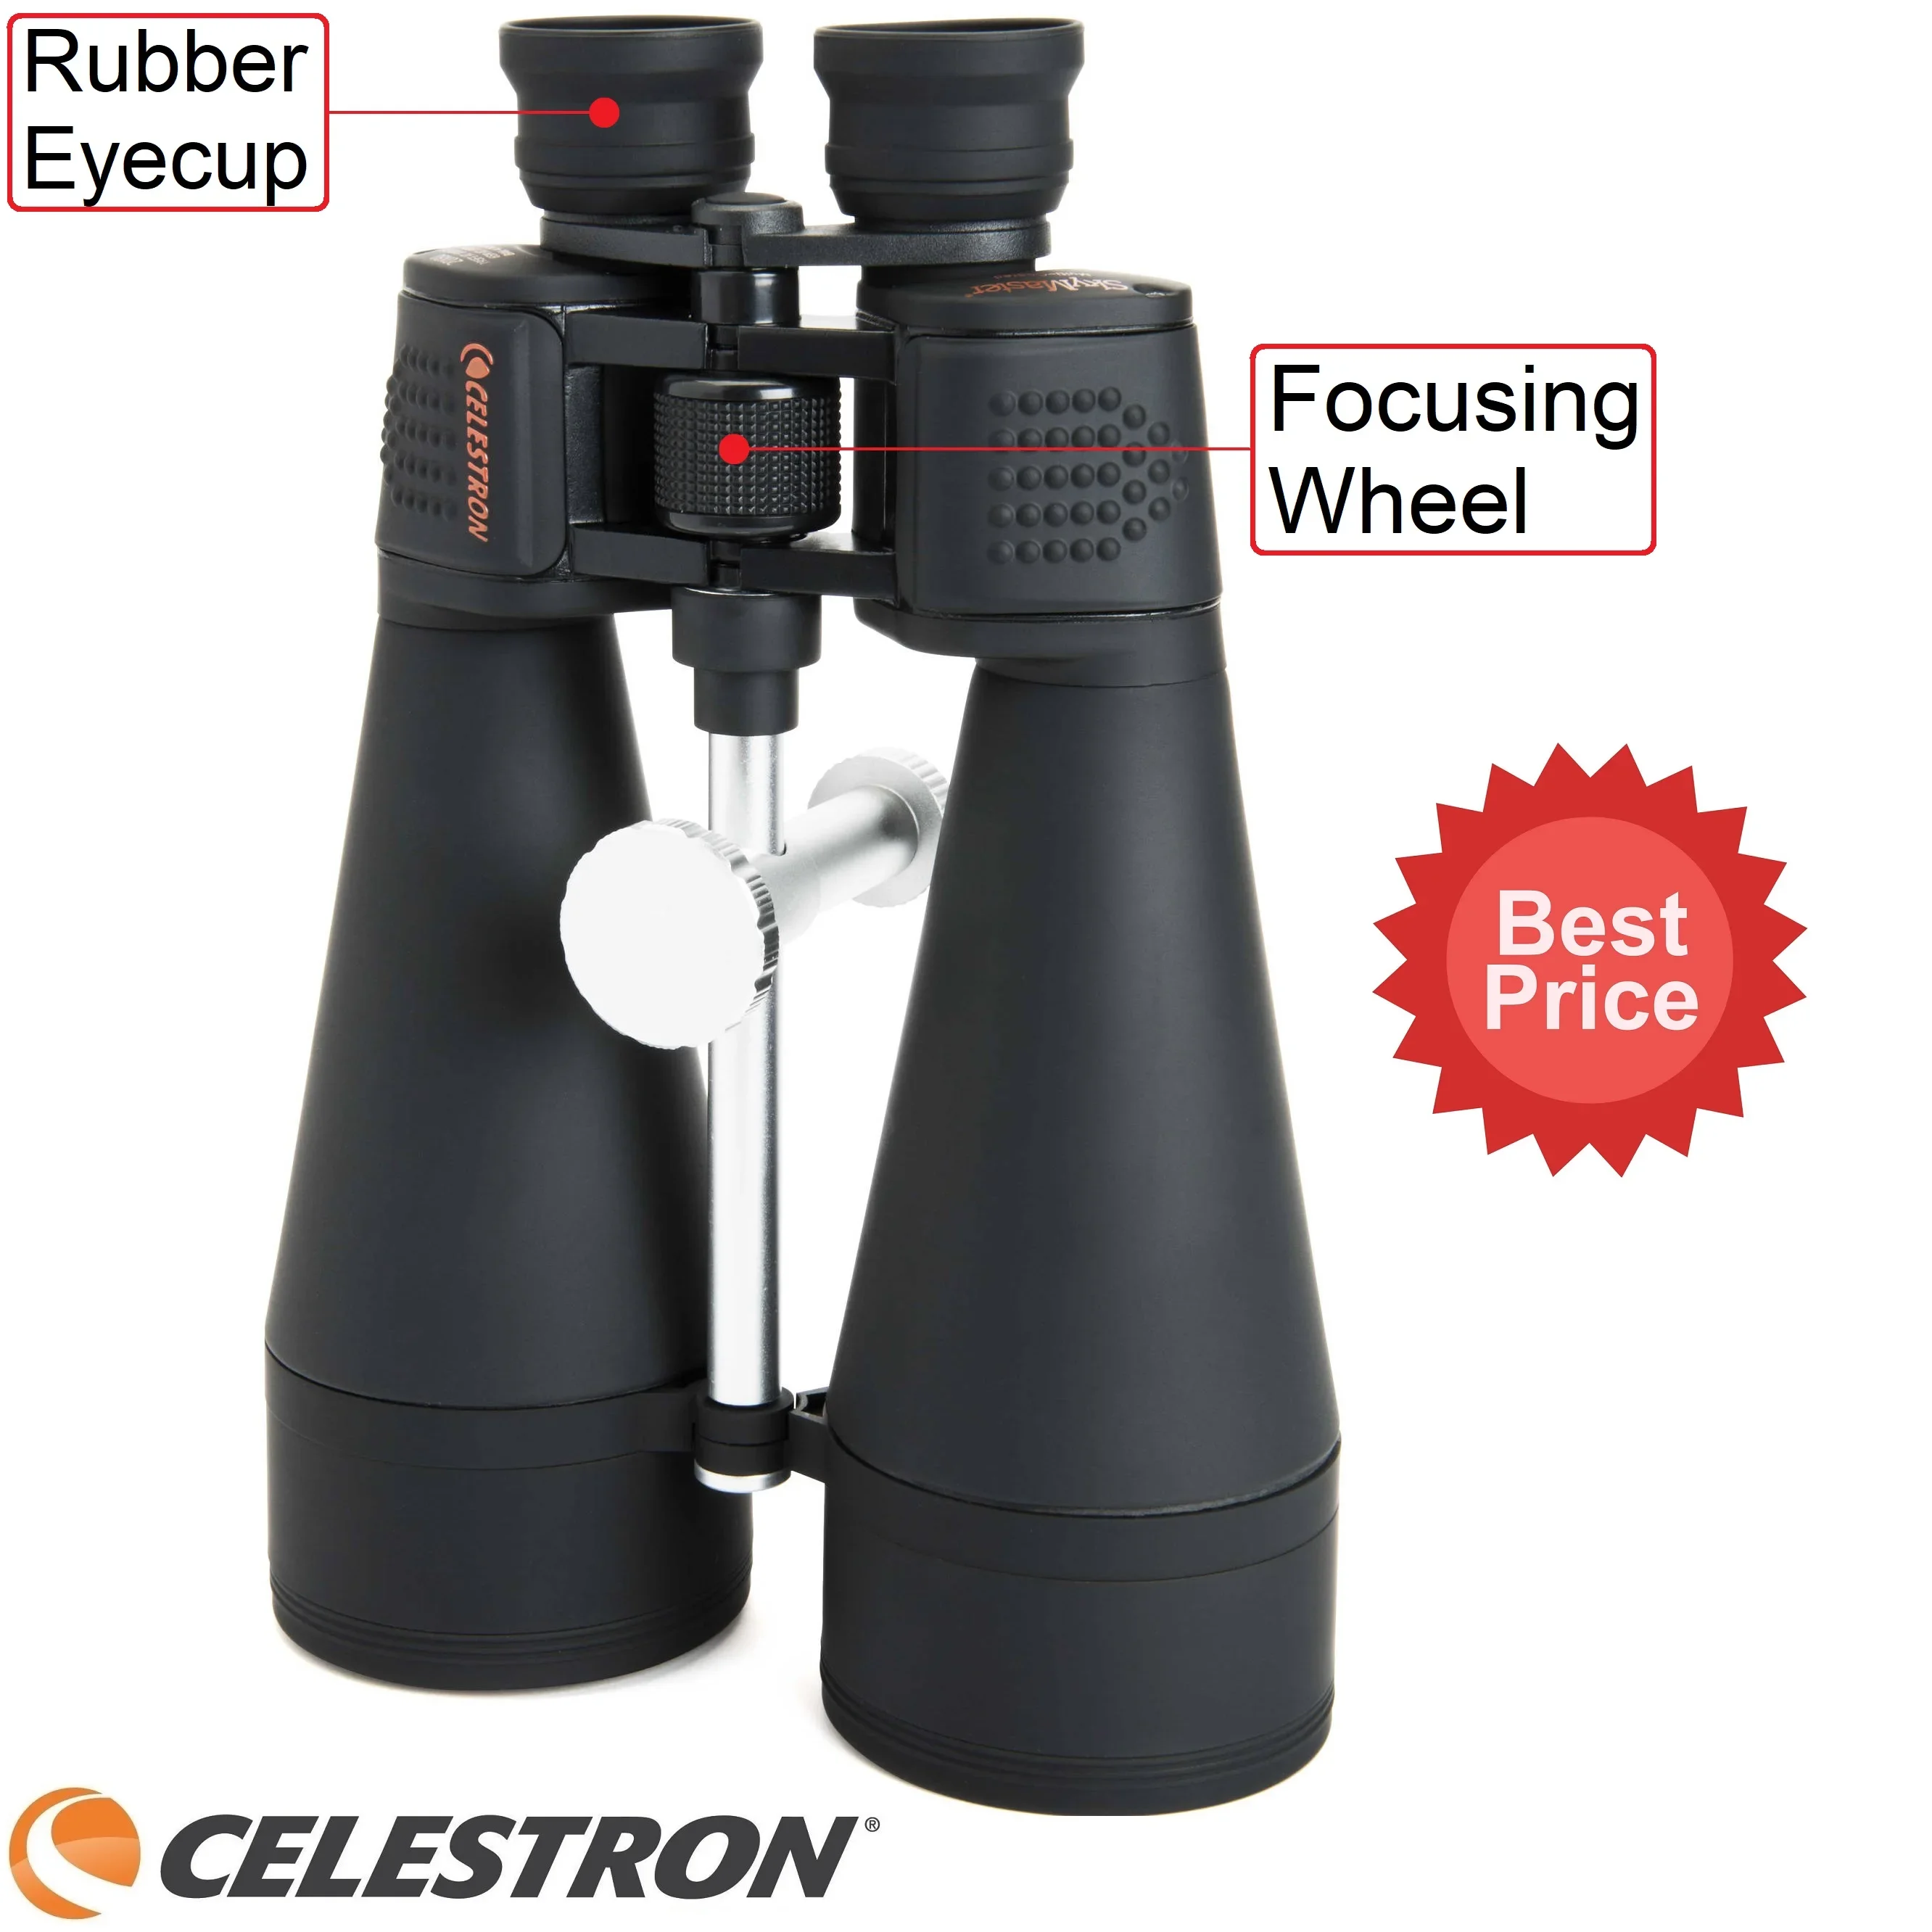 

Celestron SkyMaster 20x80 Large-Aperture Astronomy Outdoor Binoculars For Astronomical Observation And Long Distance Viewing